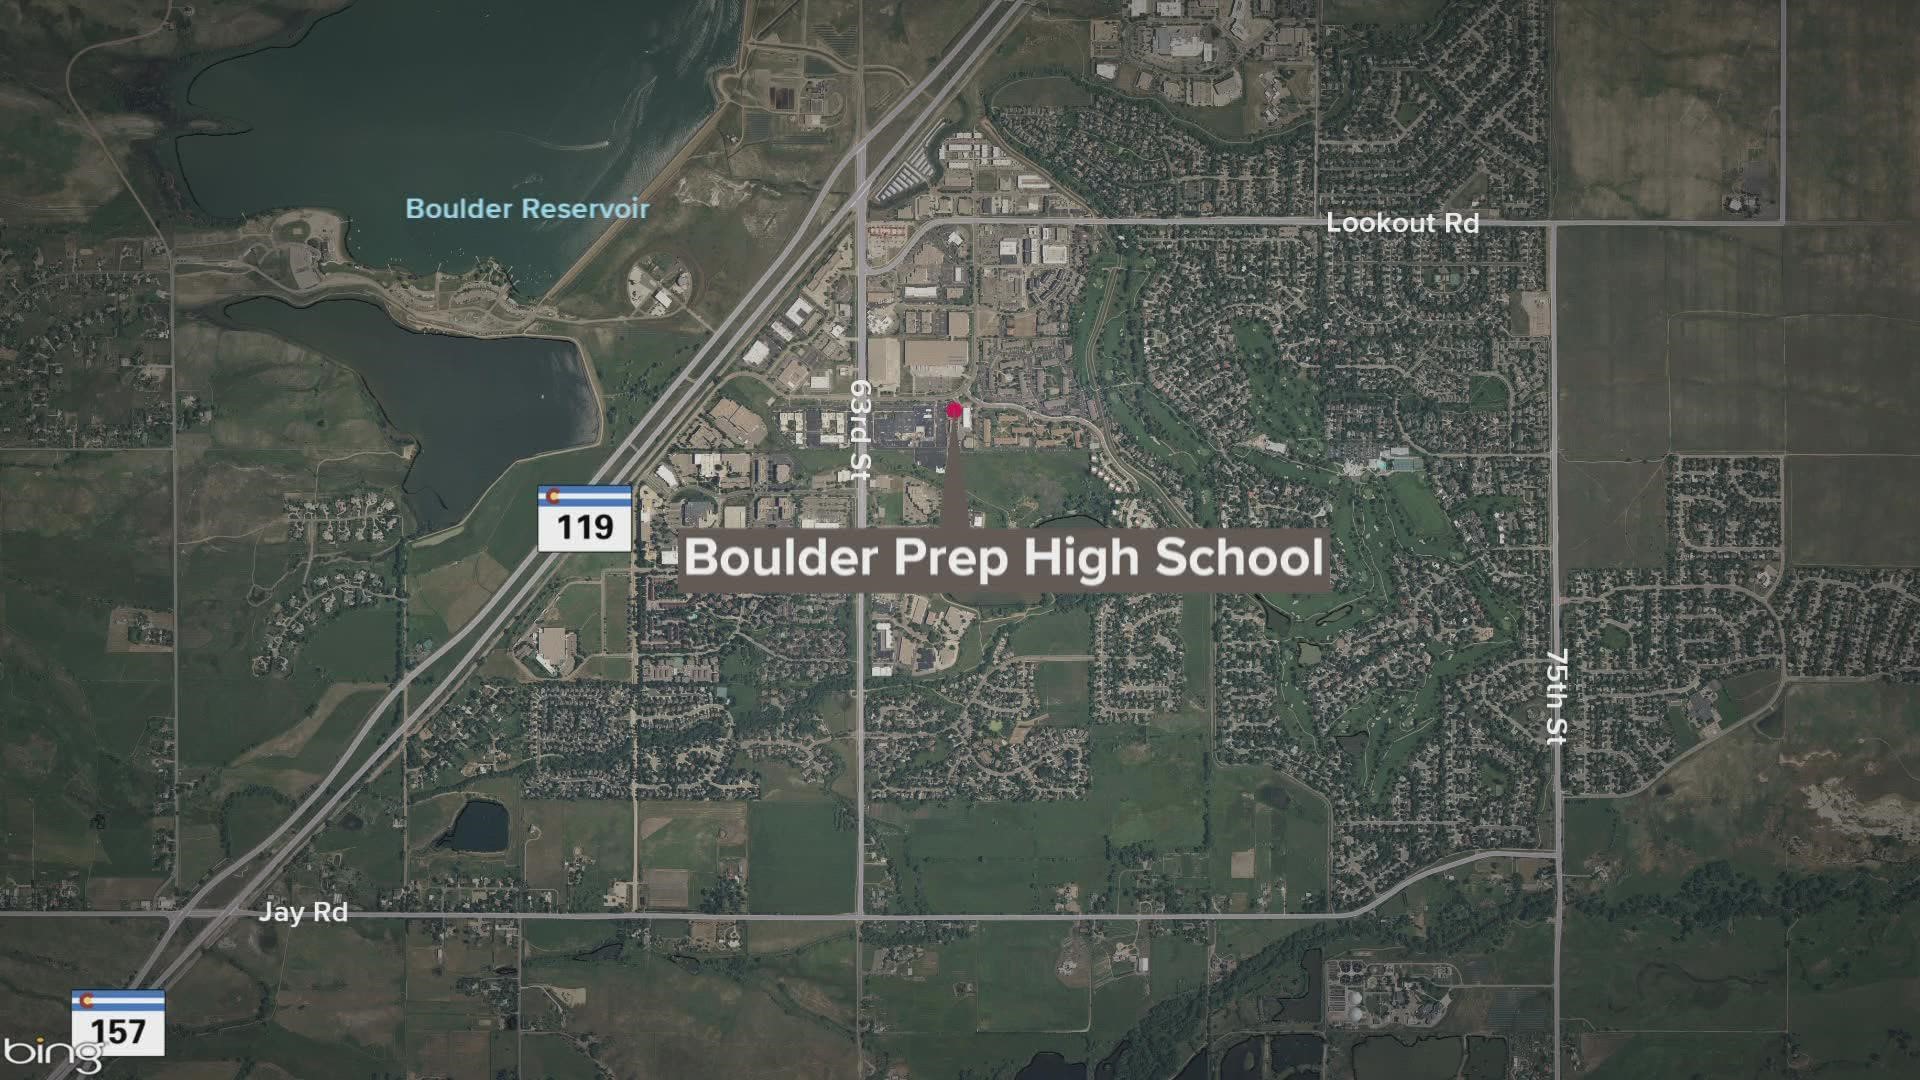 Police said a 16-year-old student made a threat of violence toward Boulder Prep High School.